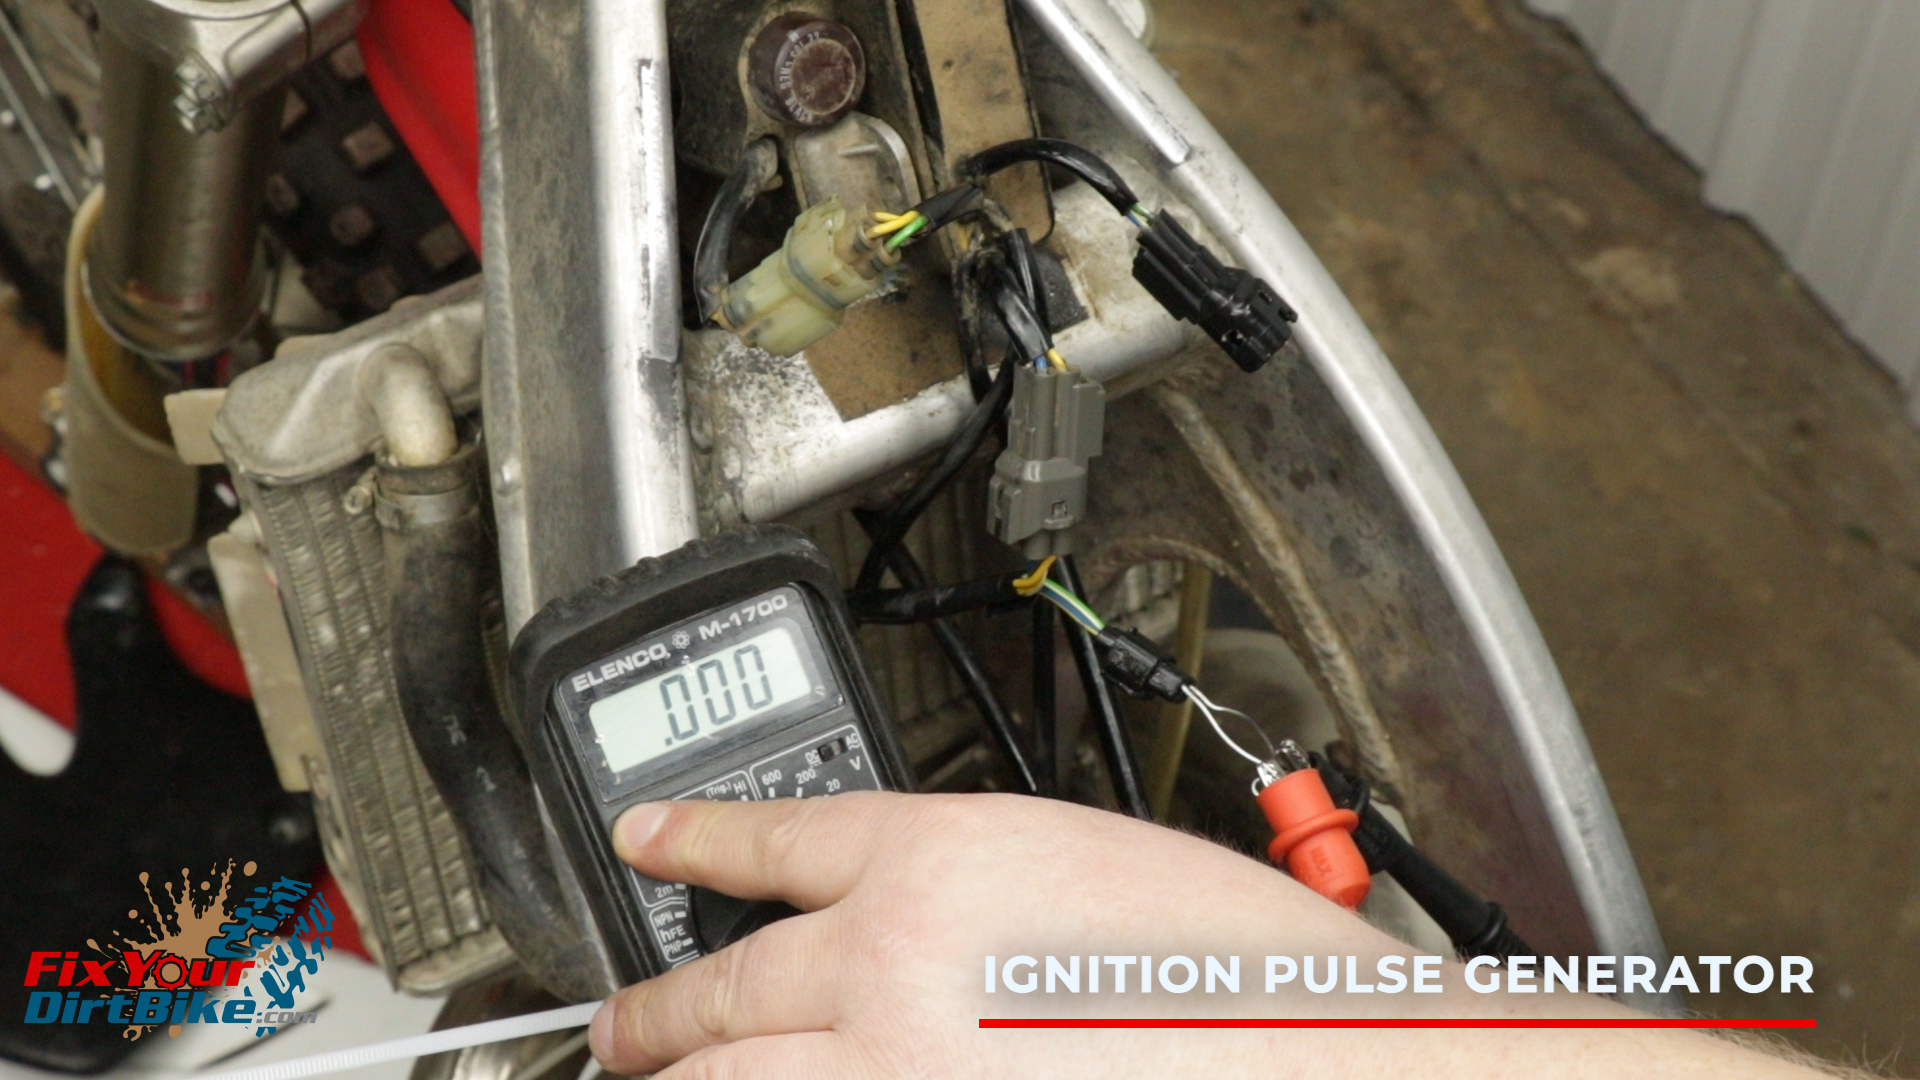 Connect Positive Lead To Blue-Yellow And Negative To Green-White Wire To Ignition Pulse Generator Test Peak Voltage